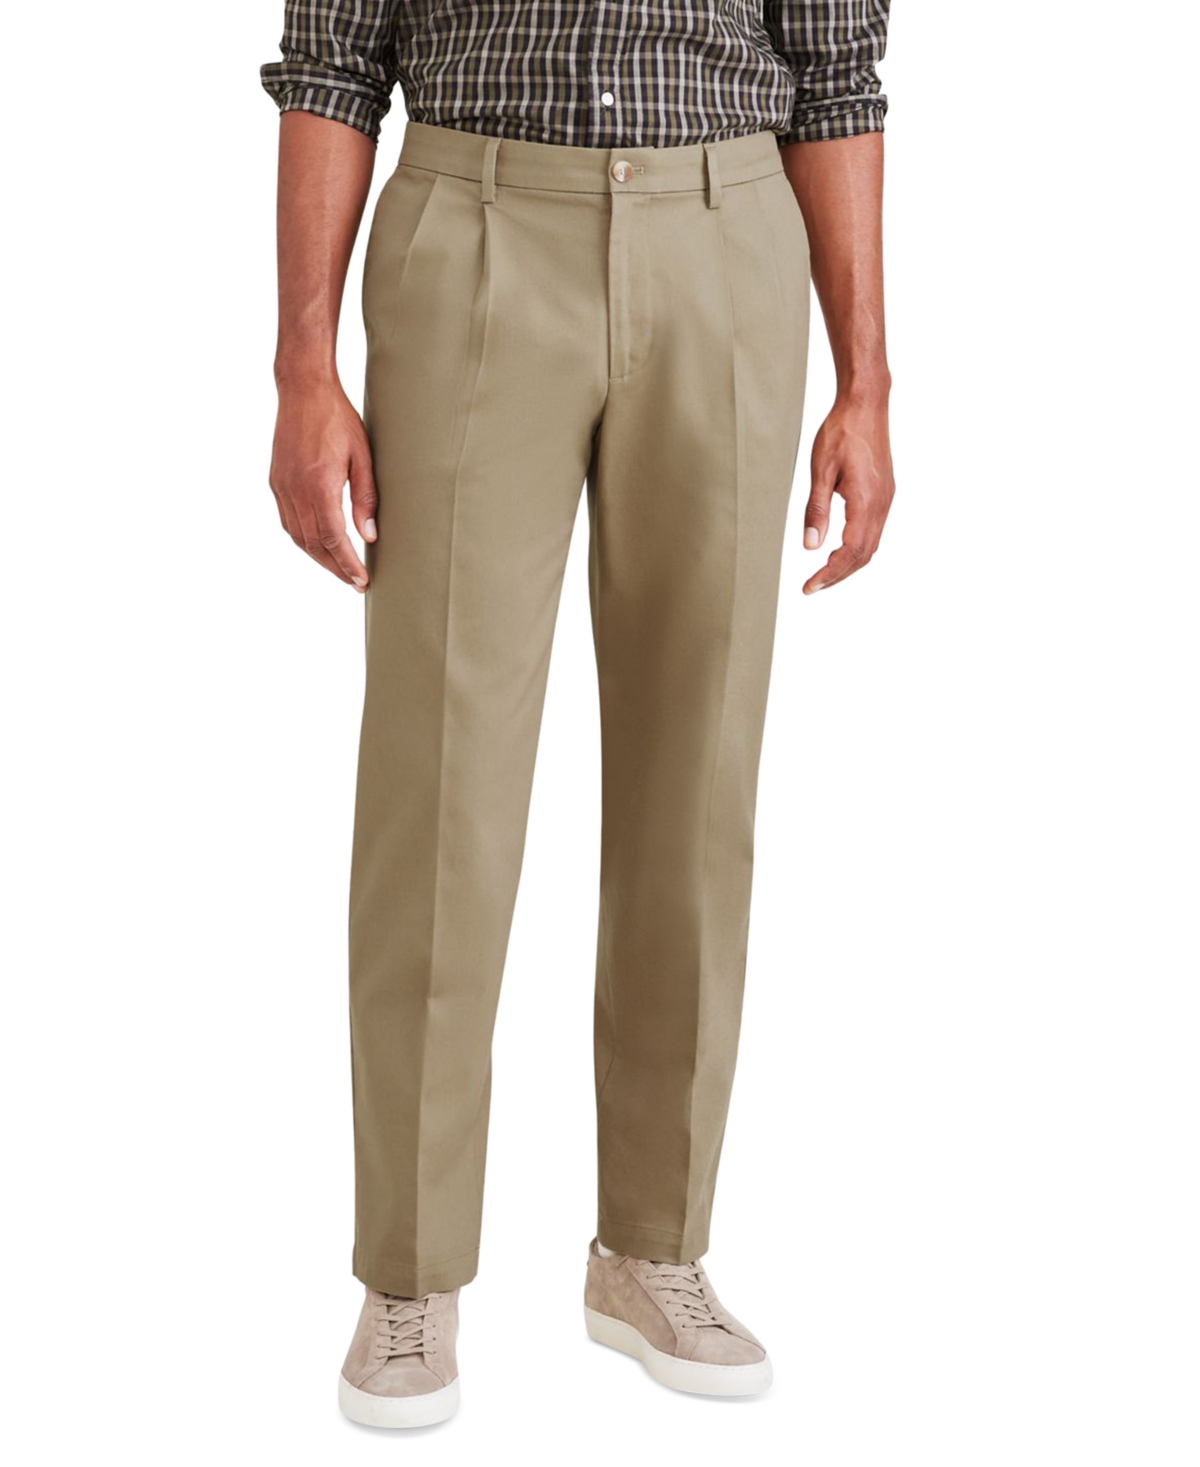 Men's Big & Tall Signature Classic Fit Pleated Iron Free Pants with Stain Defender - New British Khaki